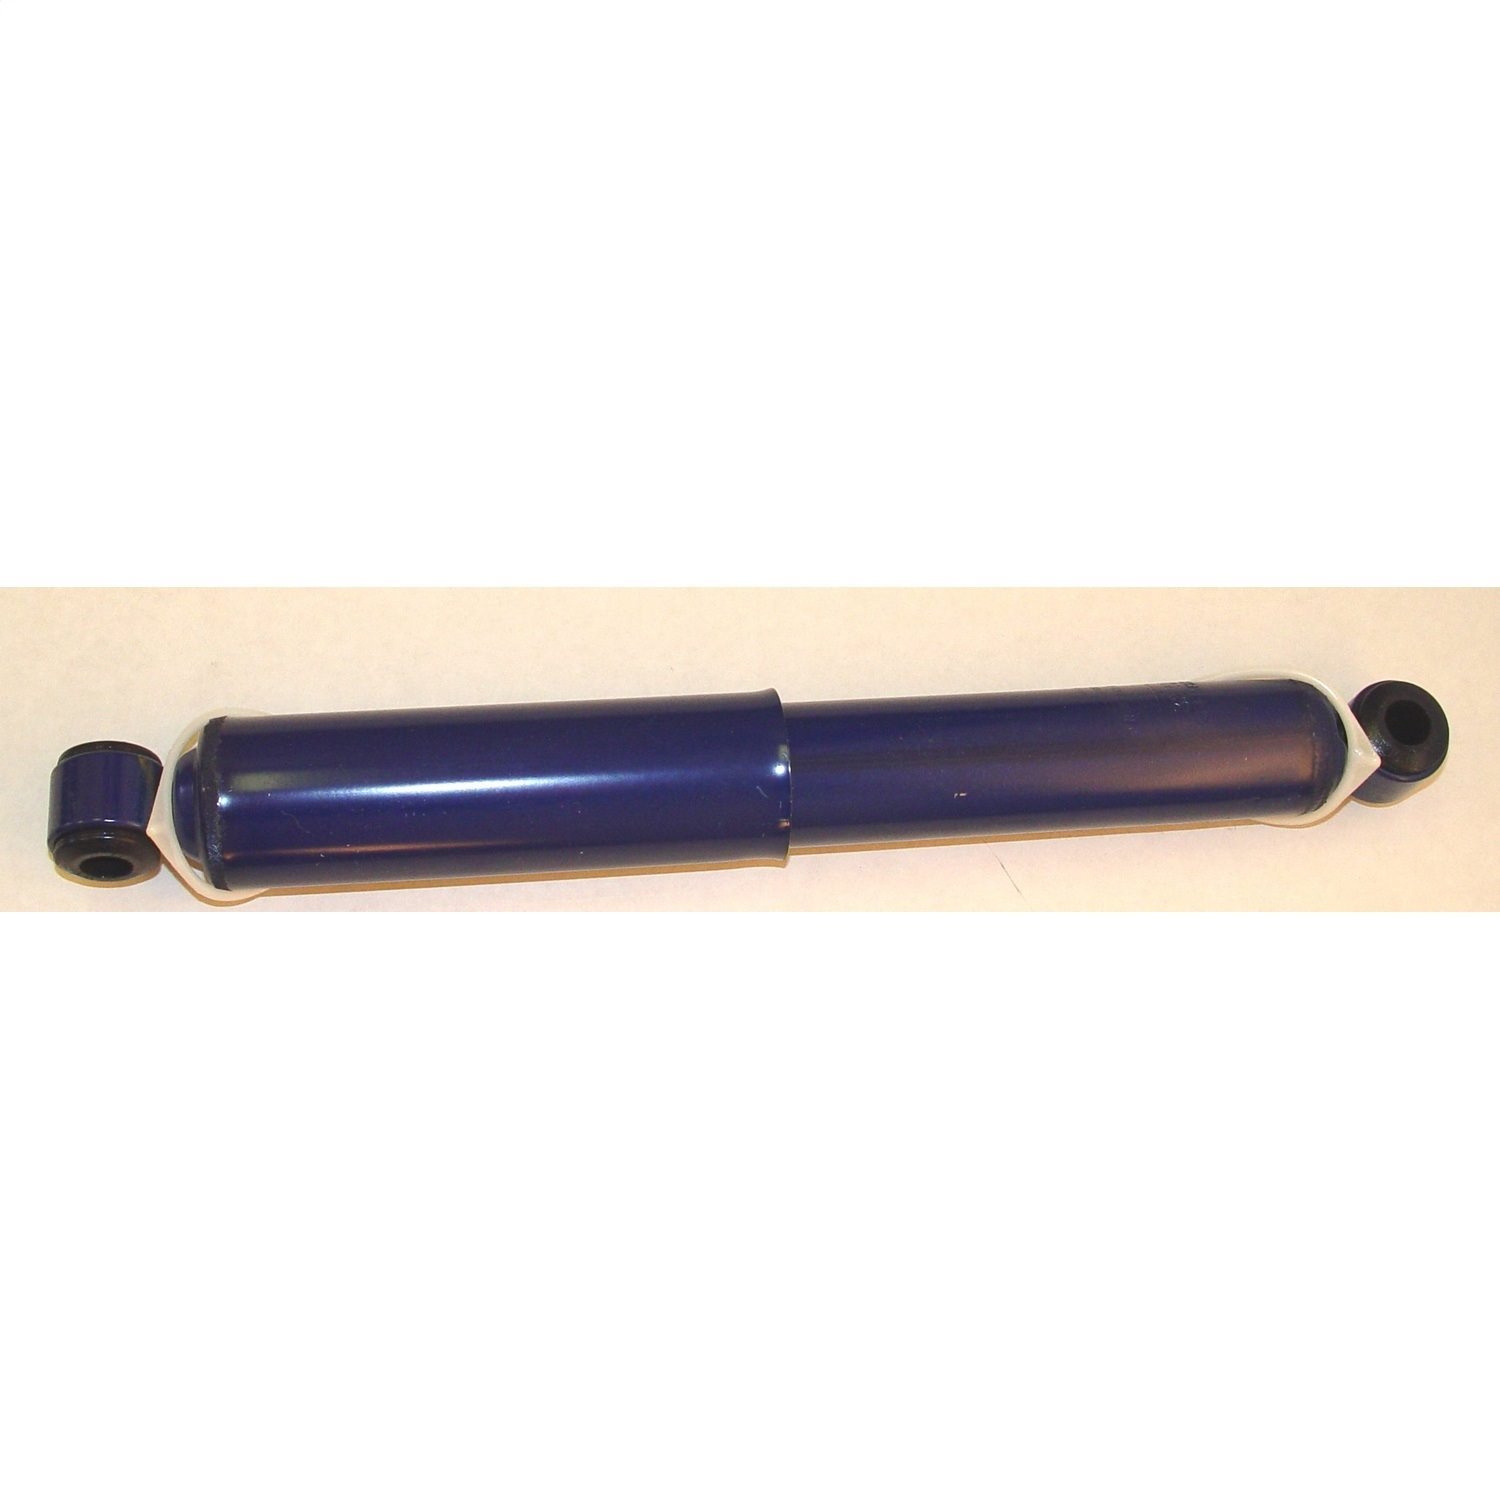 Heavy duty replacement shock absorber from Omix-ADA, Fits front or rear of 41-45 Willys MBs and 46-81 Jeep CJ models